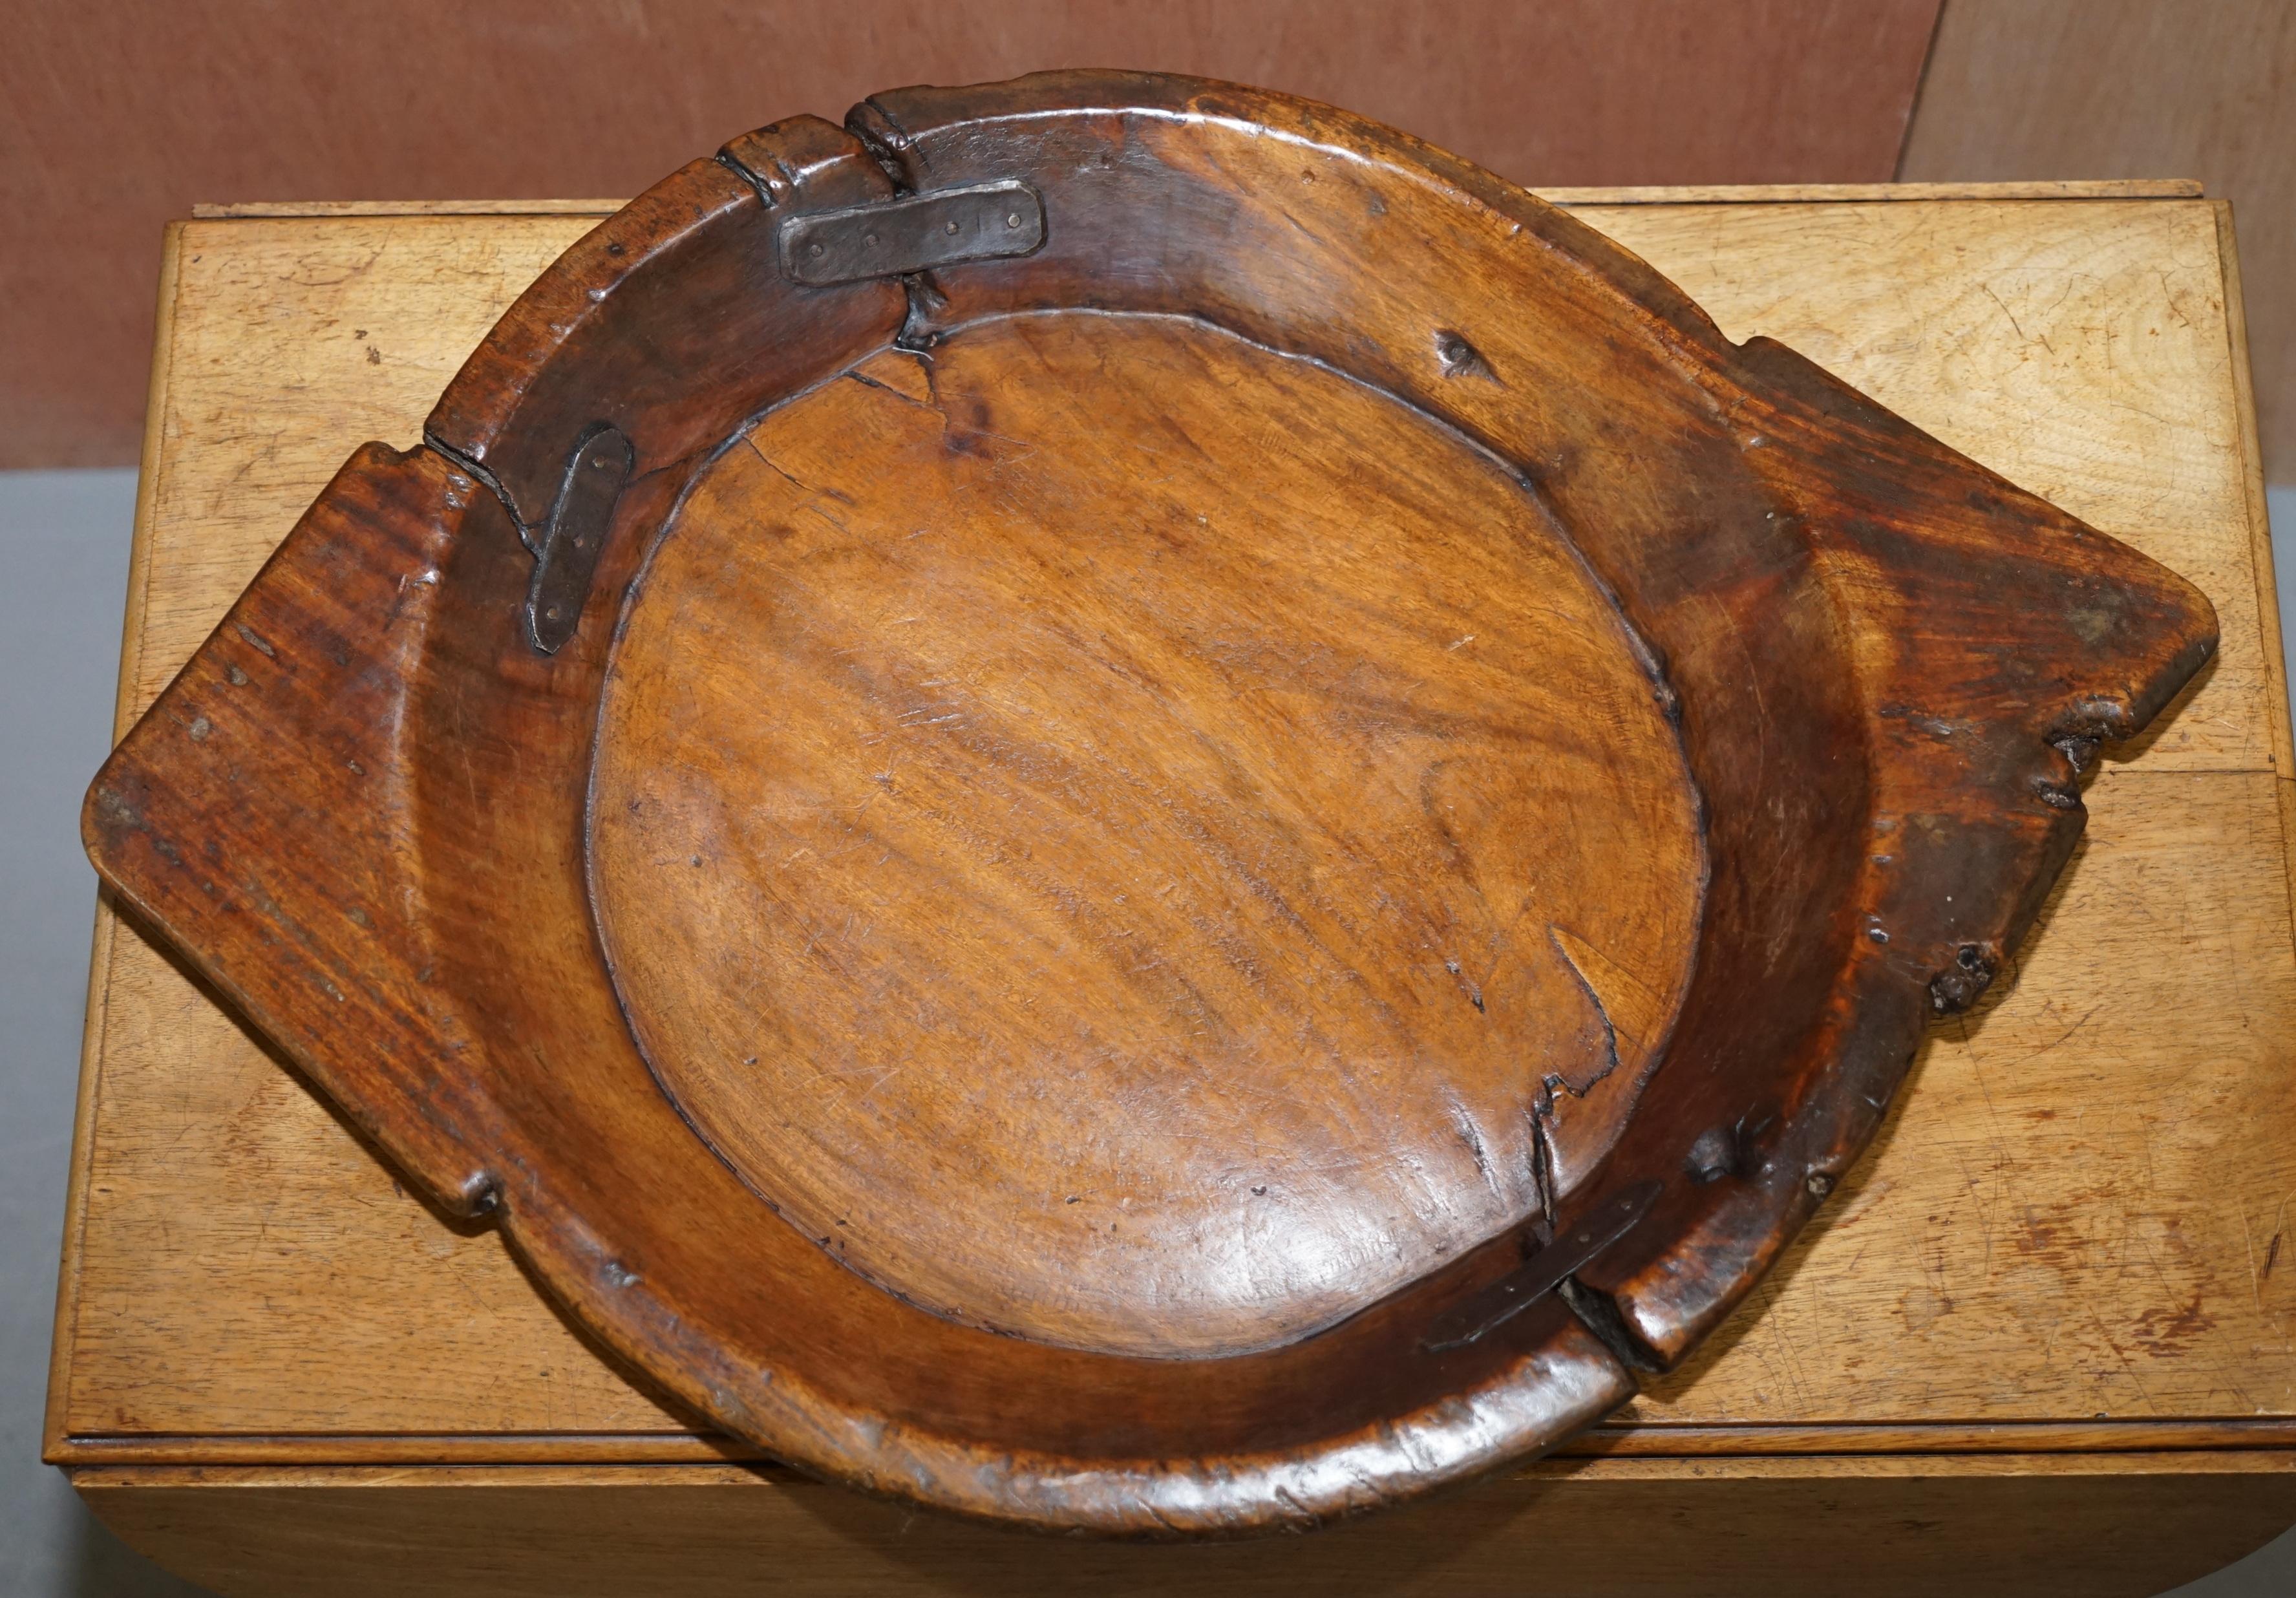 Hand-Crafted Primate Large French Walnut Fruit Bowl with Antique Metal Repairs Stunning